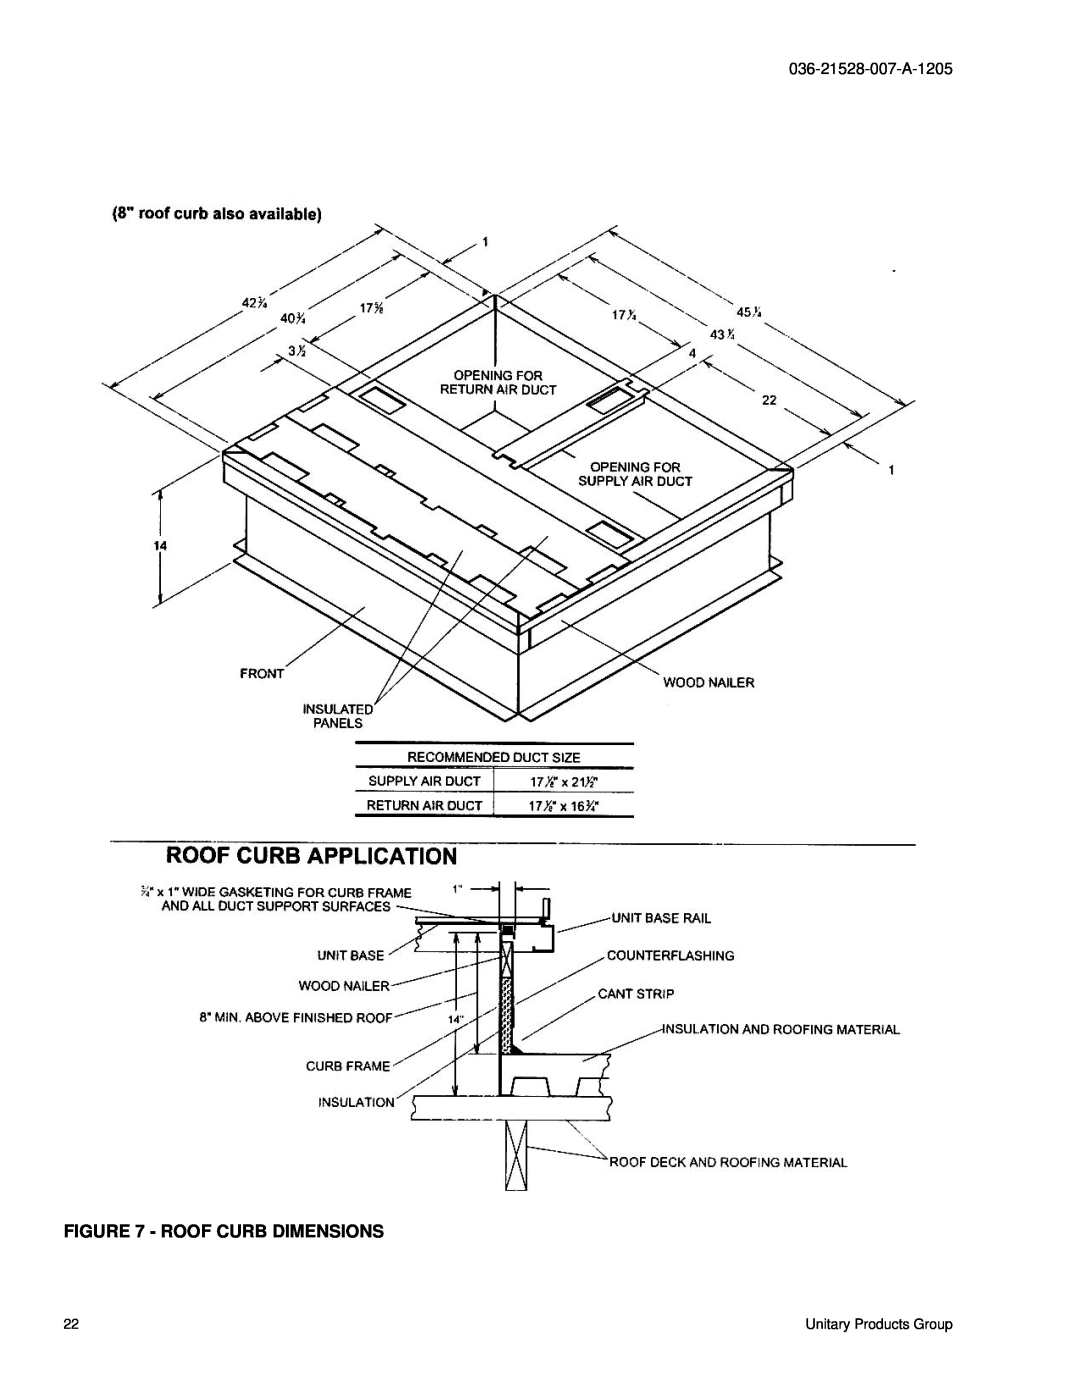 York BHP024 manual Roof Curb Dimensions, 036-21528-007-A-1205, Unitary Products Group 